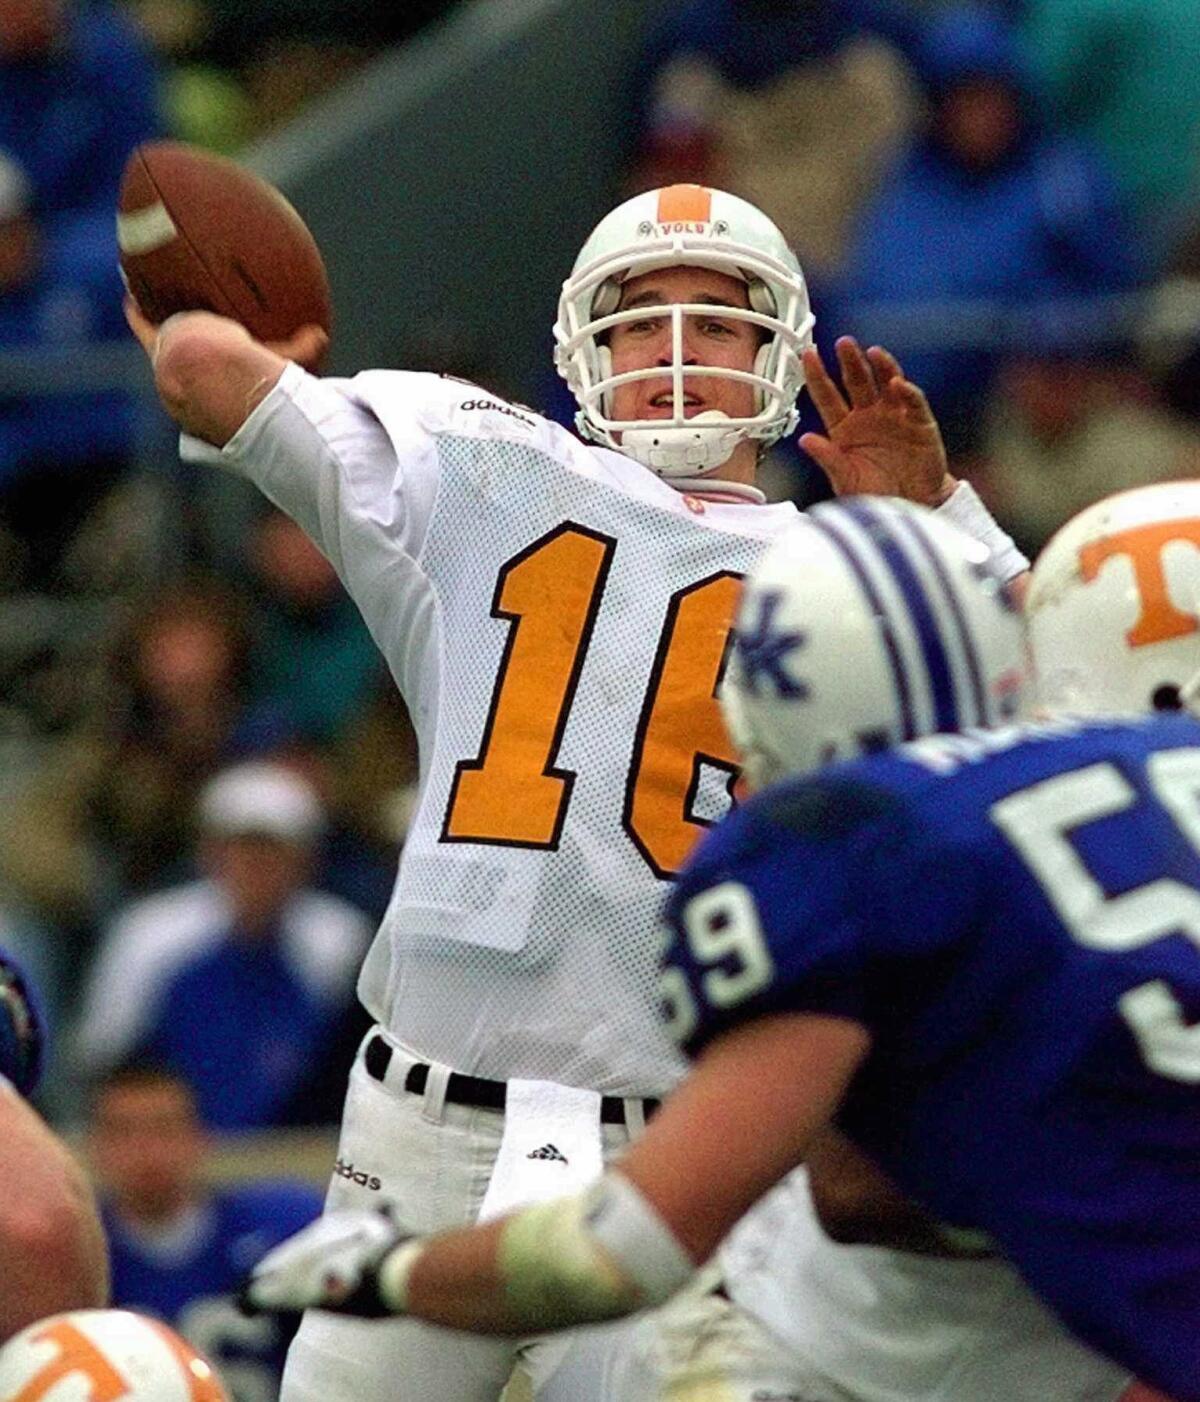 Tennessee quarterback Peyton Manning launches a pass during a game against Kentucky on Nov. 22, 1997.